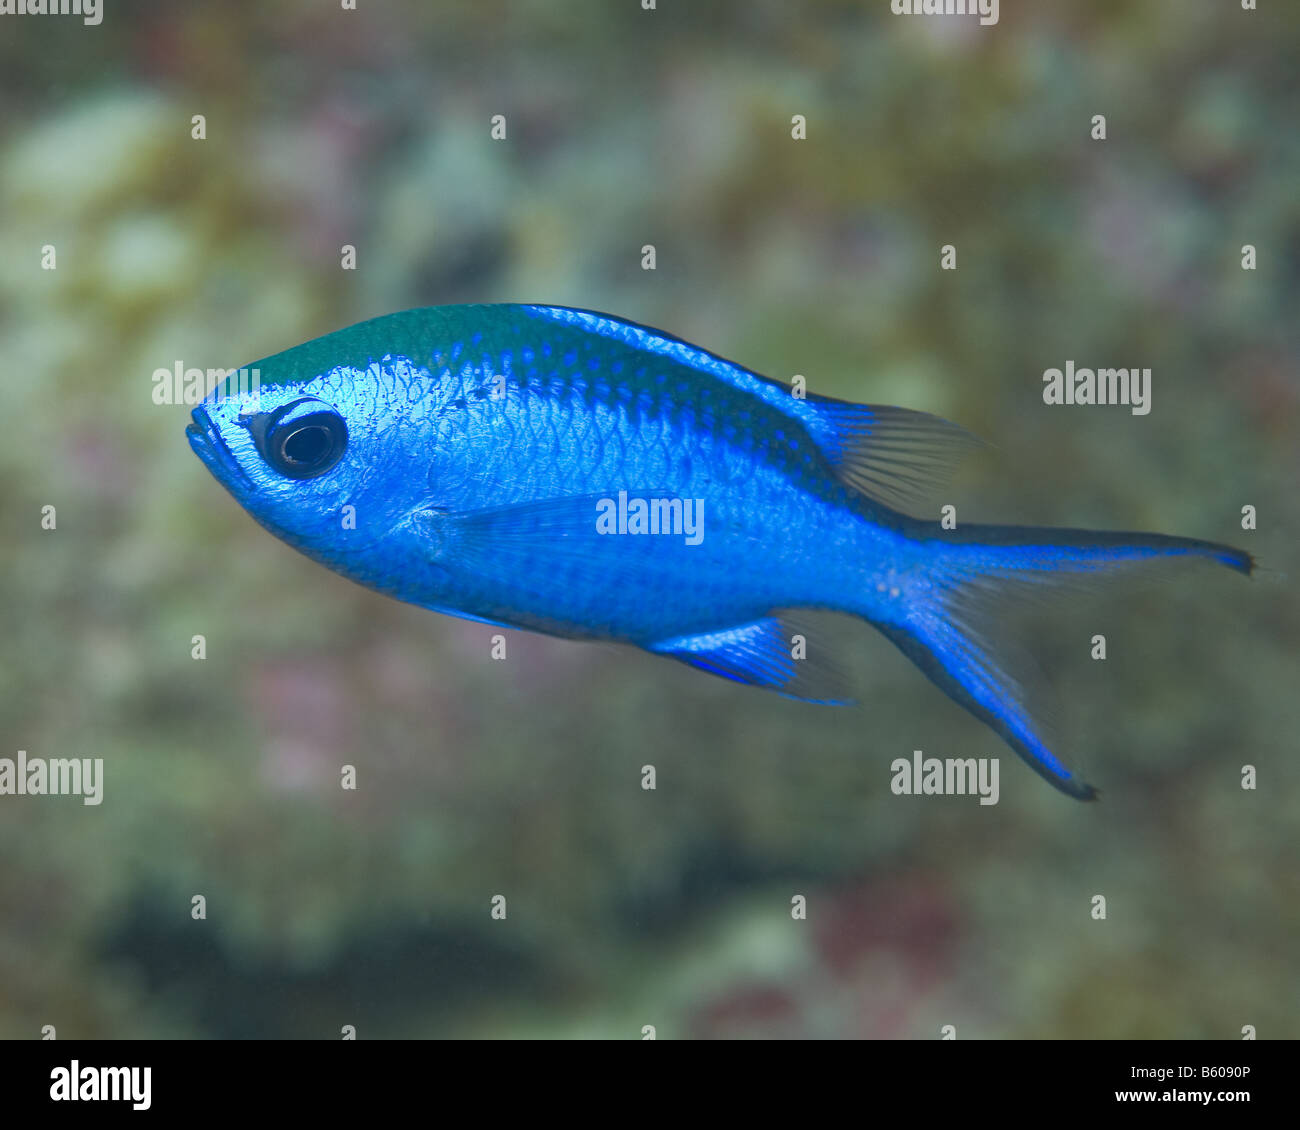 A Blue Chromis fish poses briefly for the camera. Stock Photo